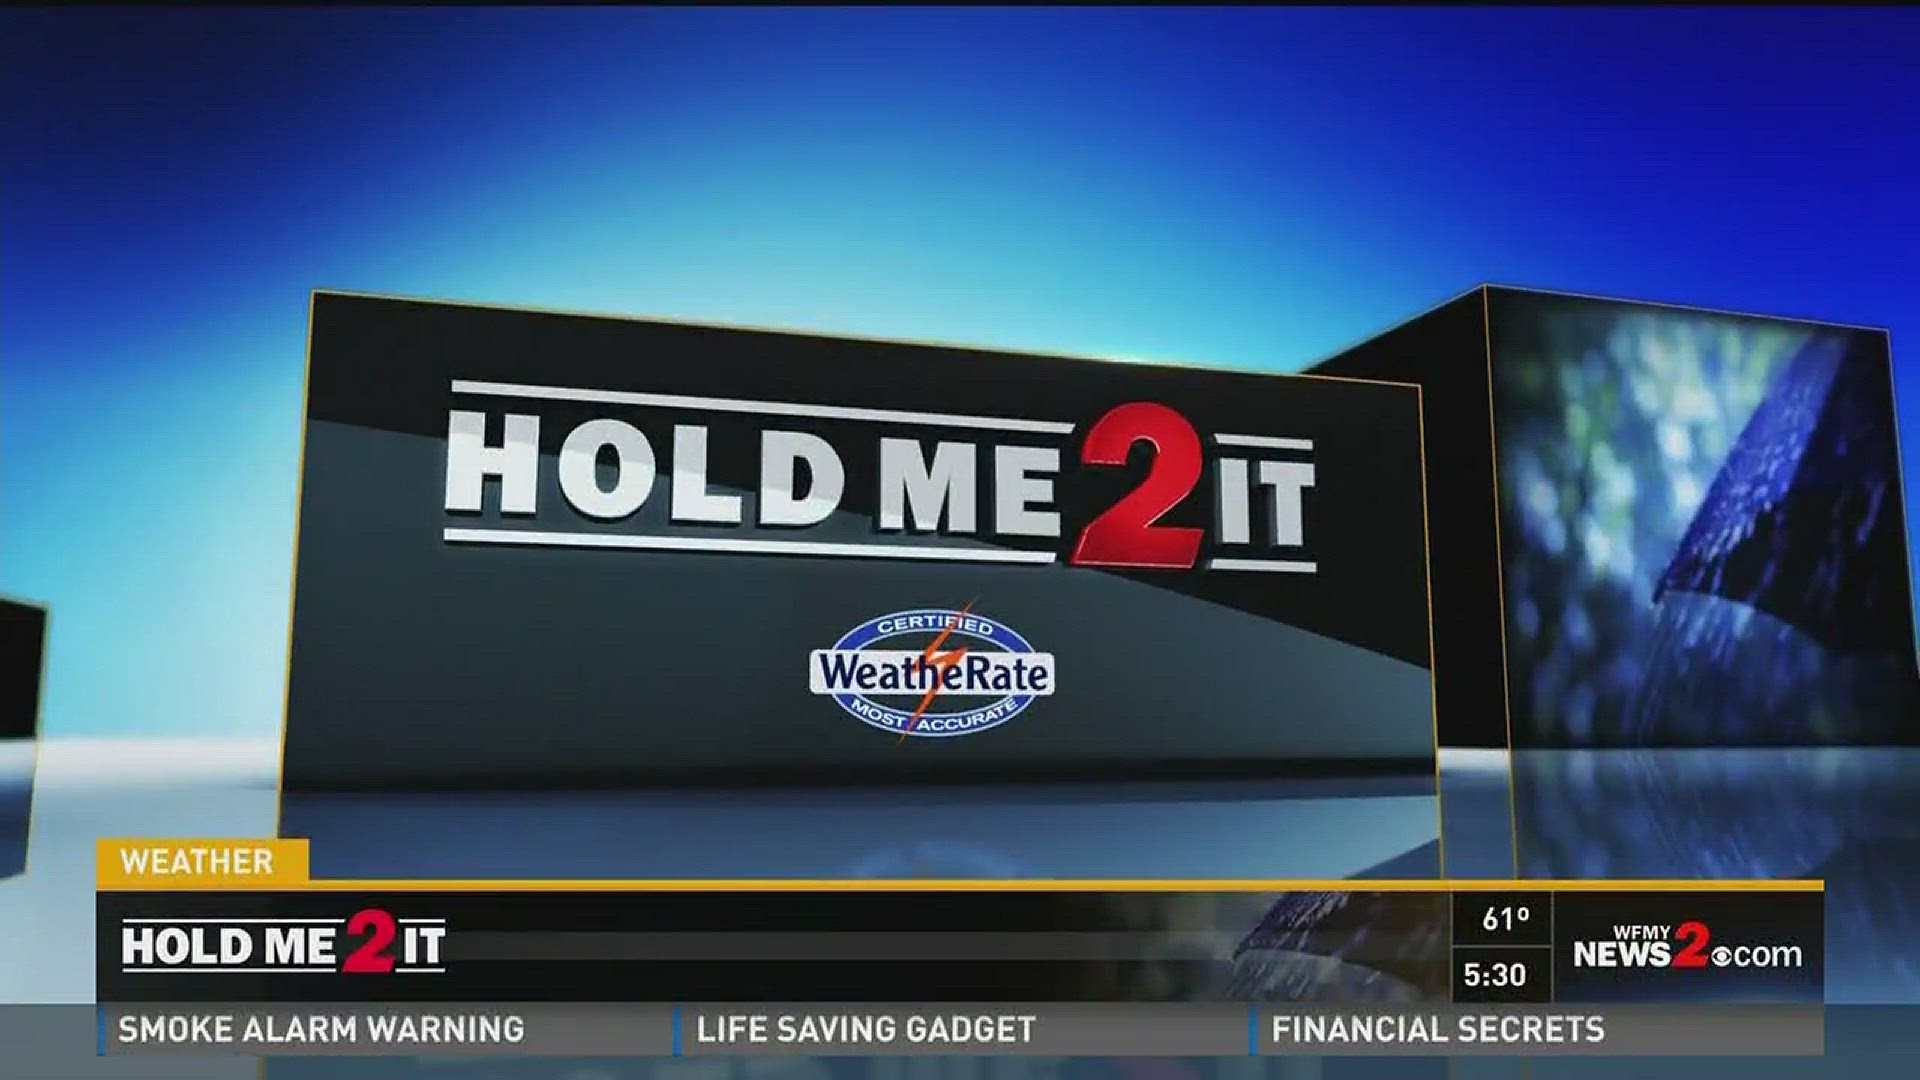 Hold Me 2 It Forecast: Tuesday Feb. 21, 2017